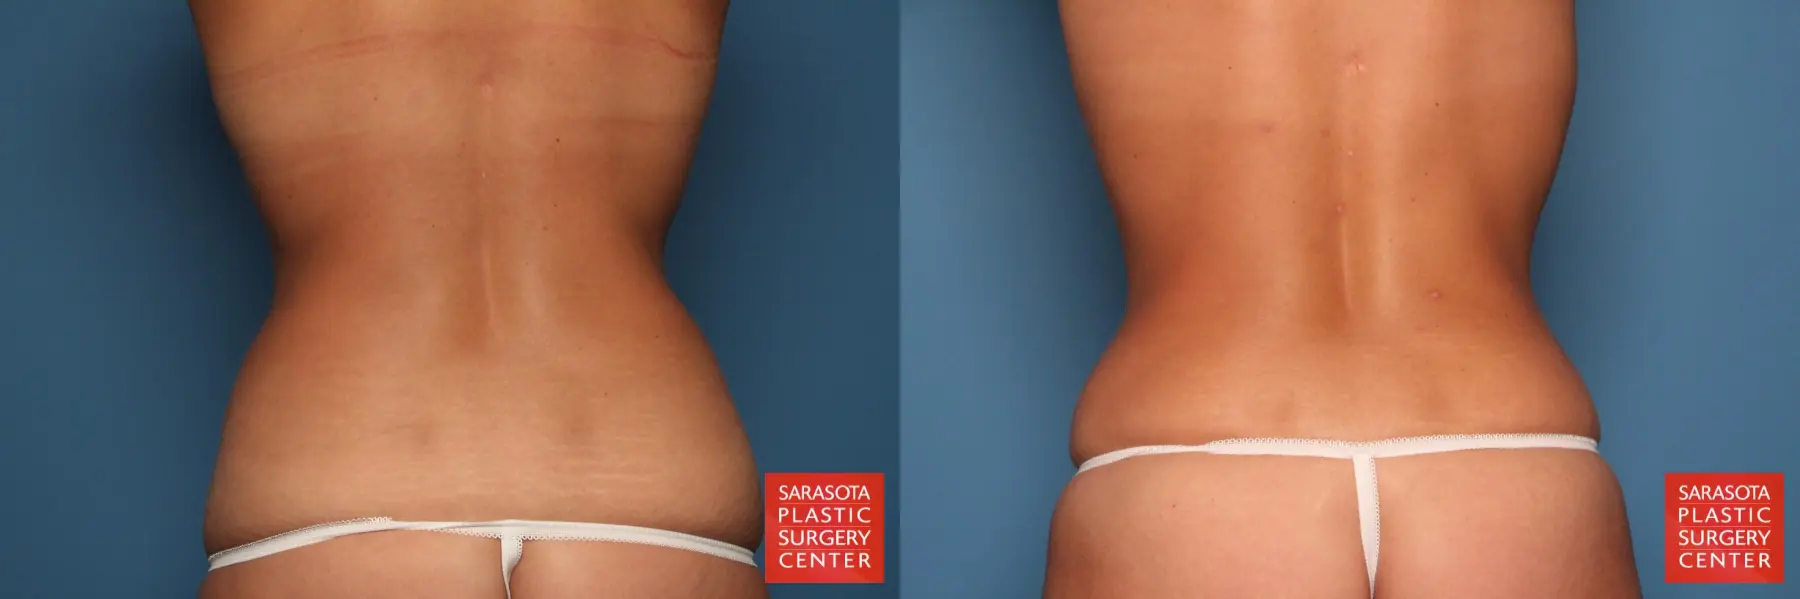 Tummy Tuck: Patient 9 - Before and After 5